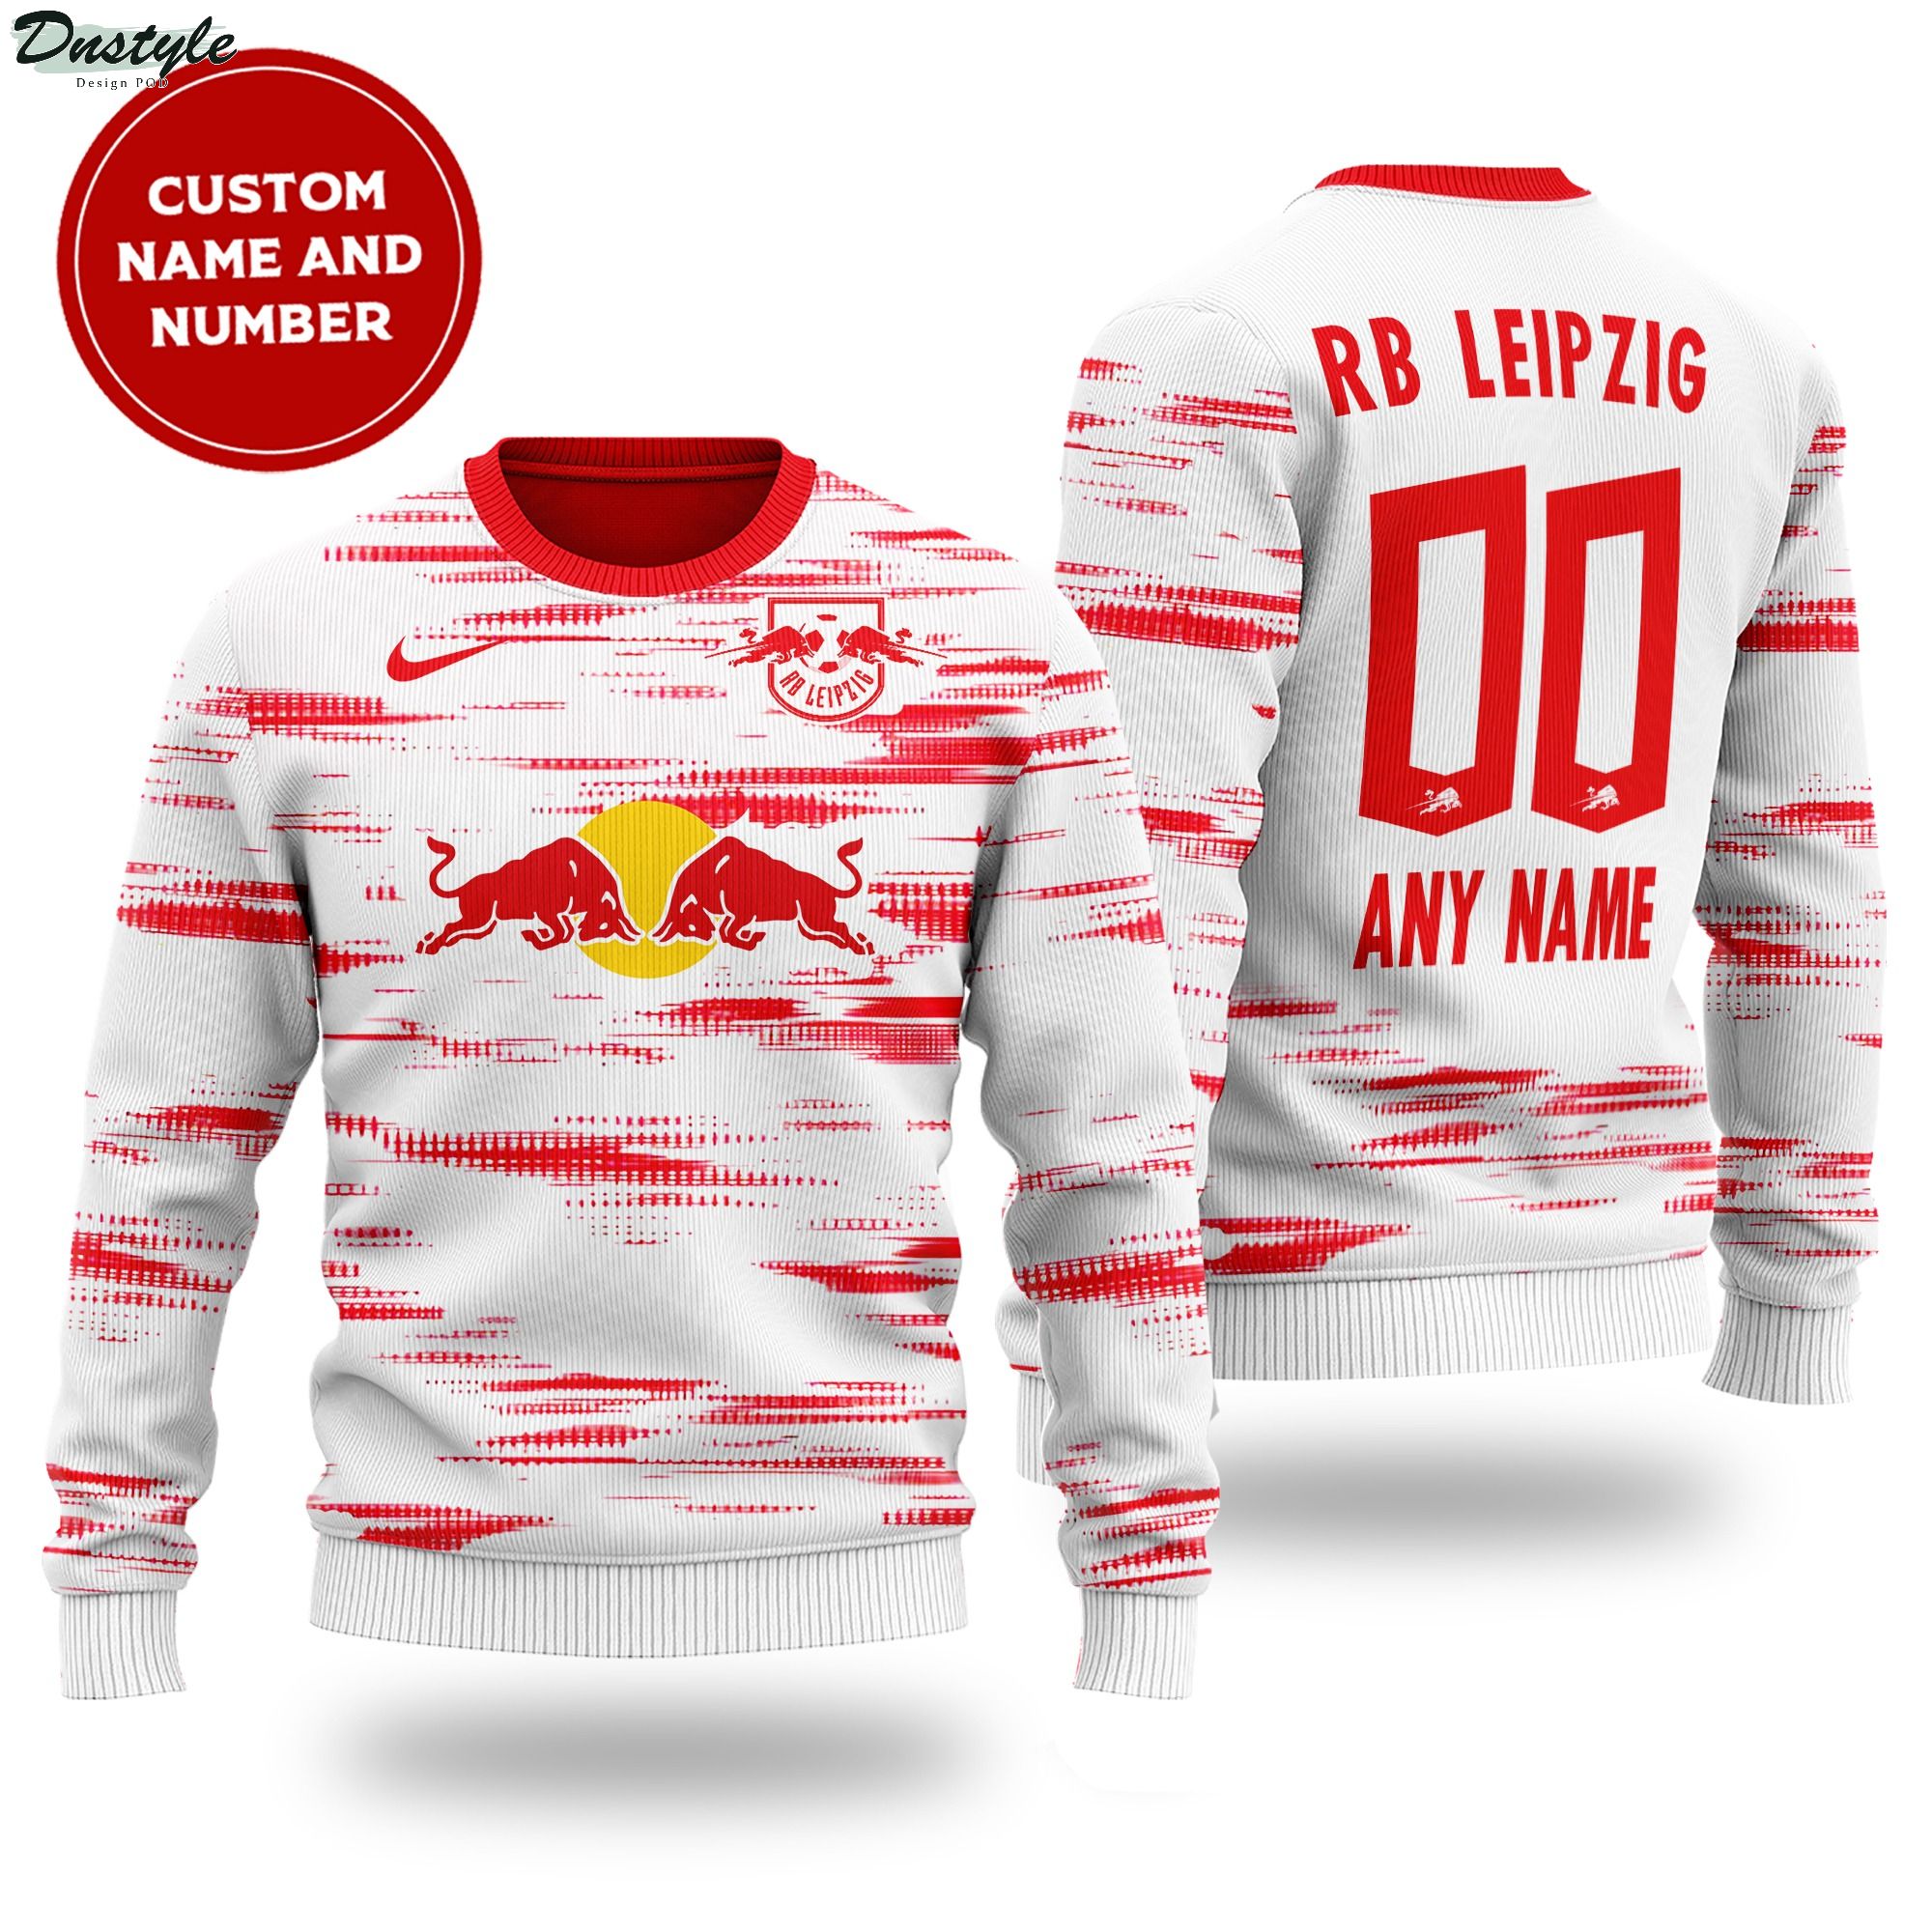 RB Leipzig custom name and number ugly sweater